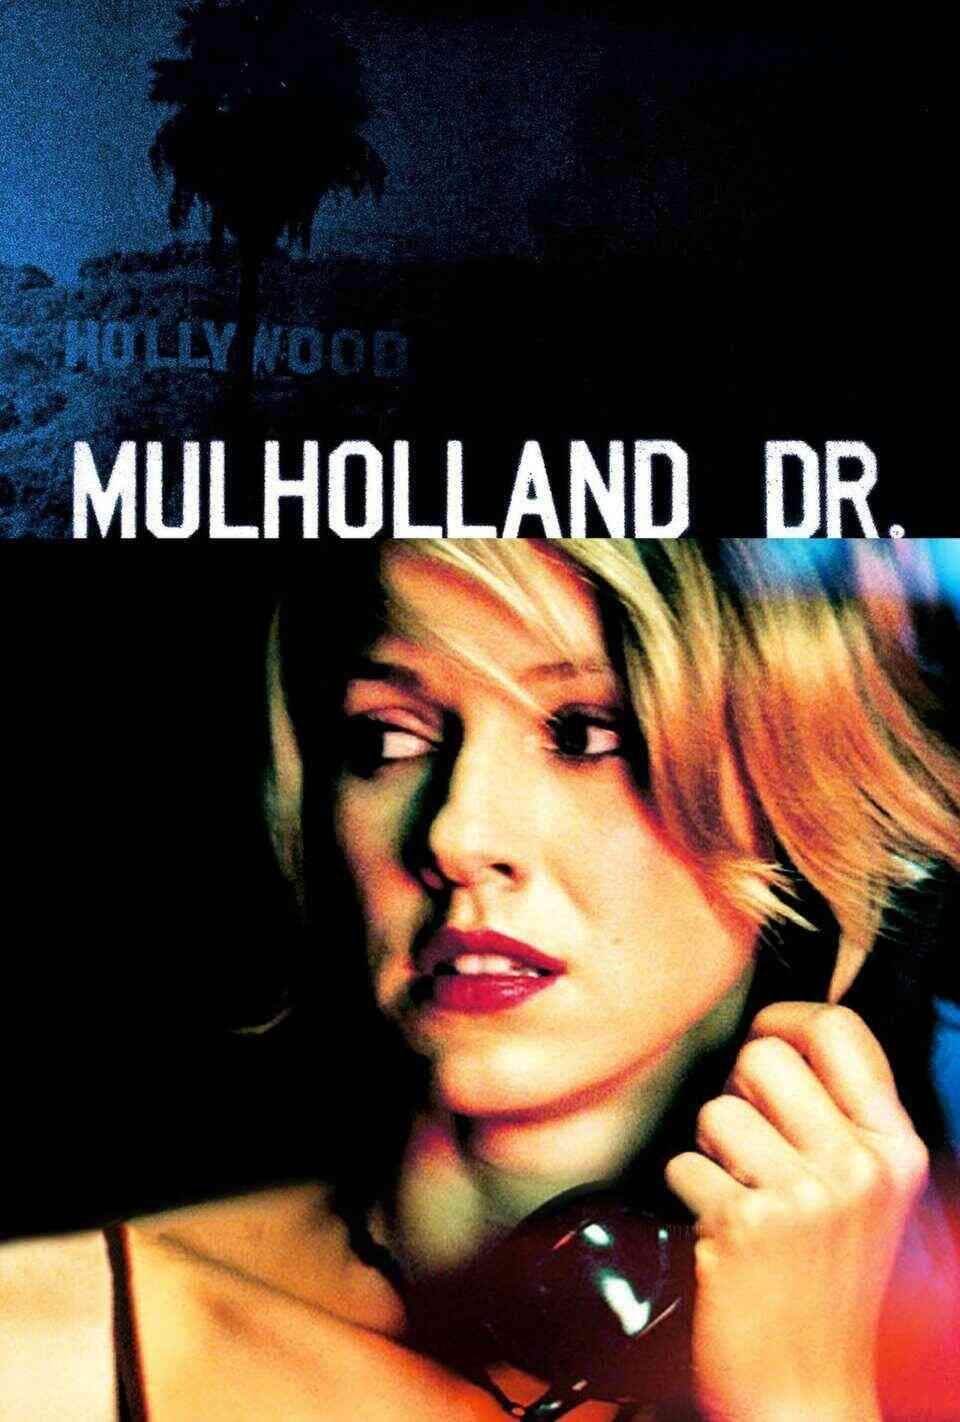 Read Mulholland Dr. screenplay (poster)